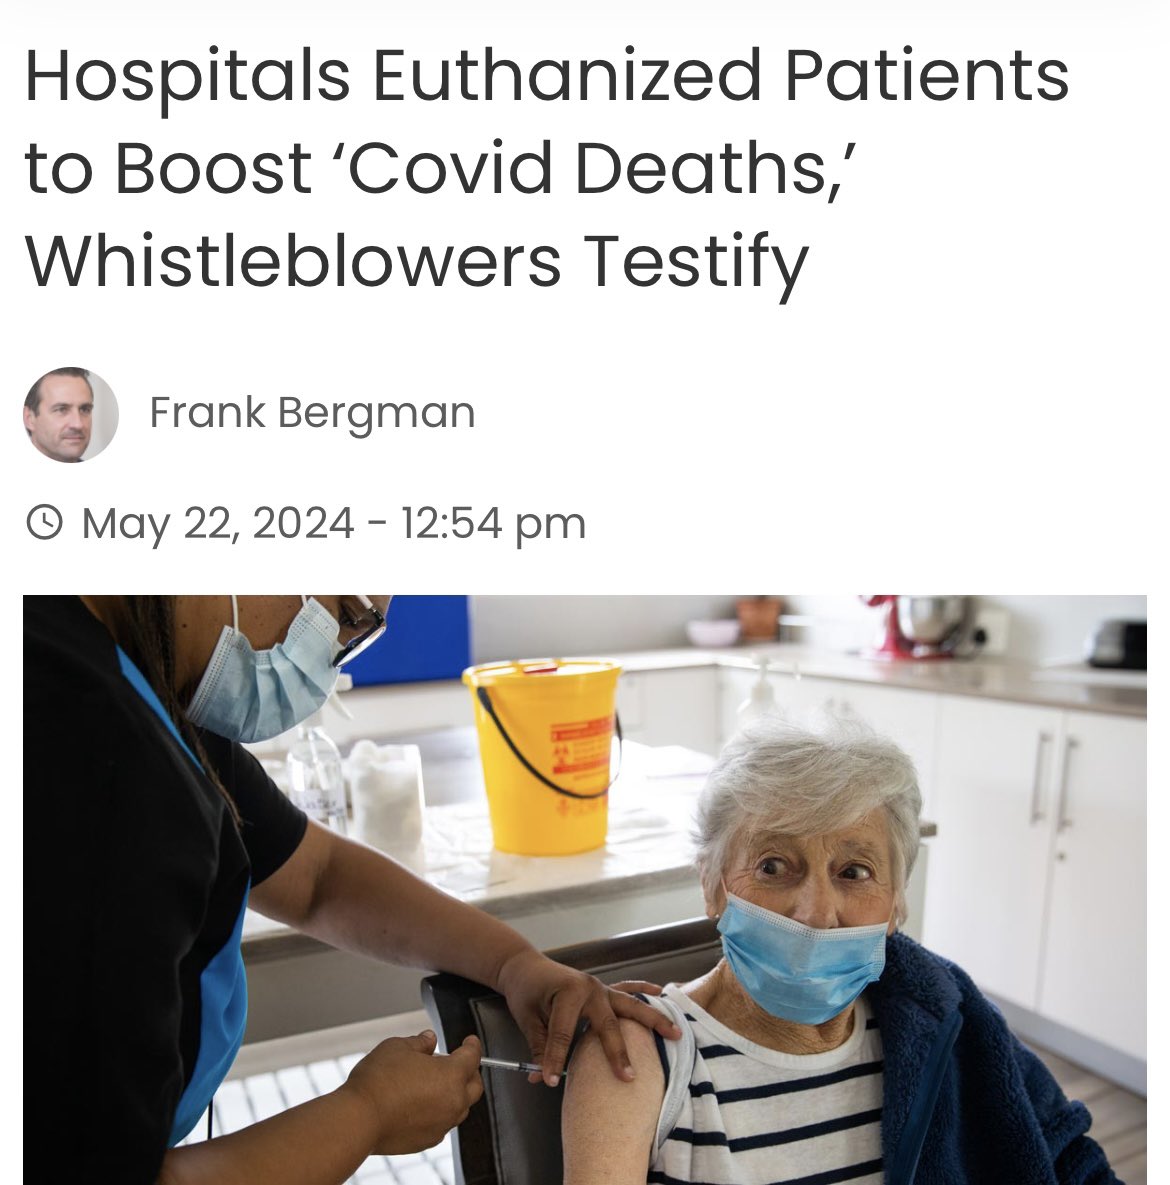 Several whistleblowers have provided explosive testimony during an official inquiry, revealing that hospitals were euthanizing patients during the pandemic and blaming their deaths on Covid.
The patients were reportedly given a lethal drug combination before their deaths were